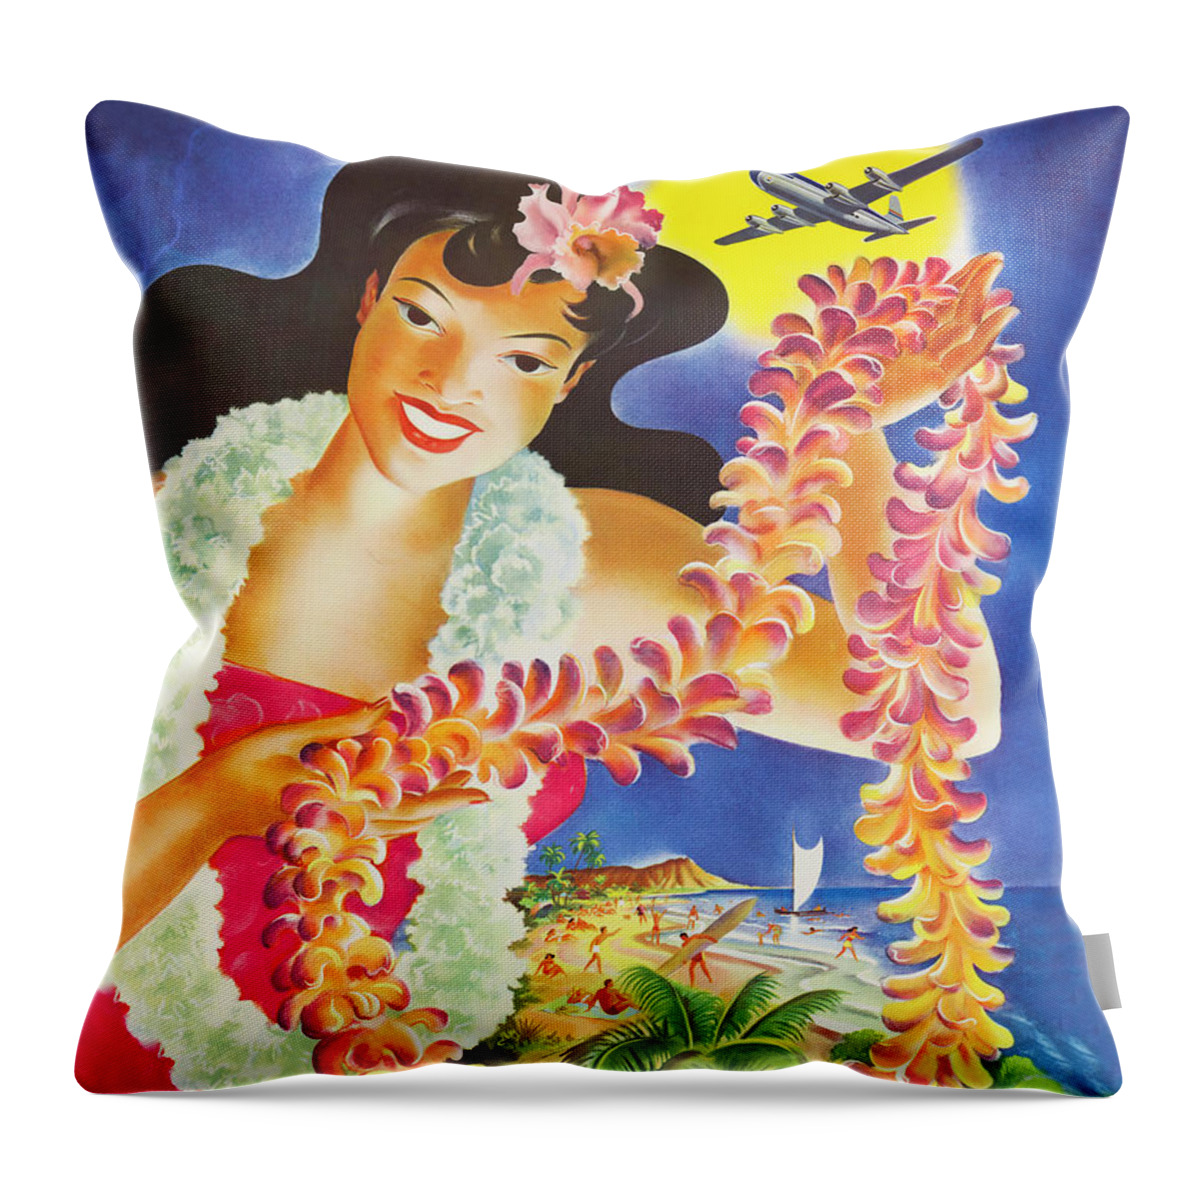 Hula Girl Throw Pillow featuring the painting Hula Girl with exotic flower wreath, airline vintage poster by Long Shot